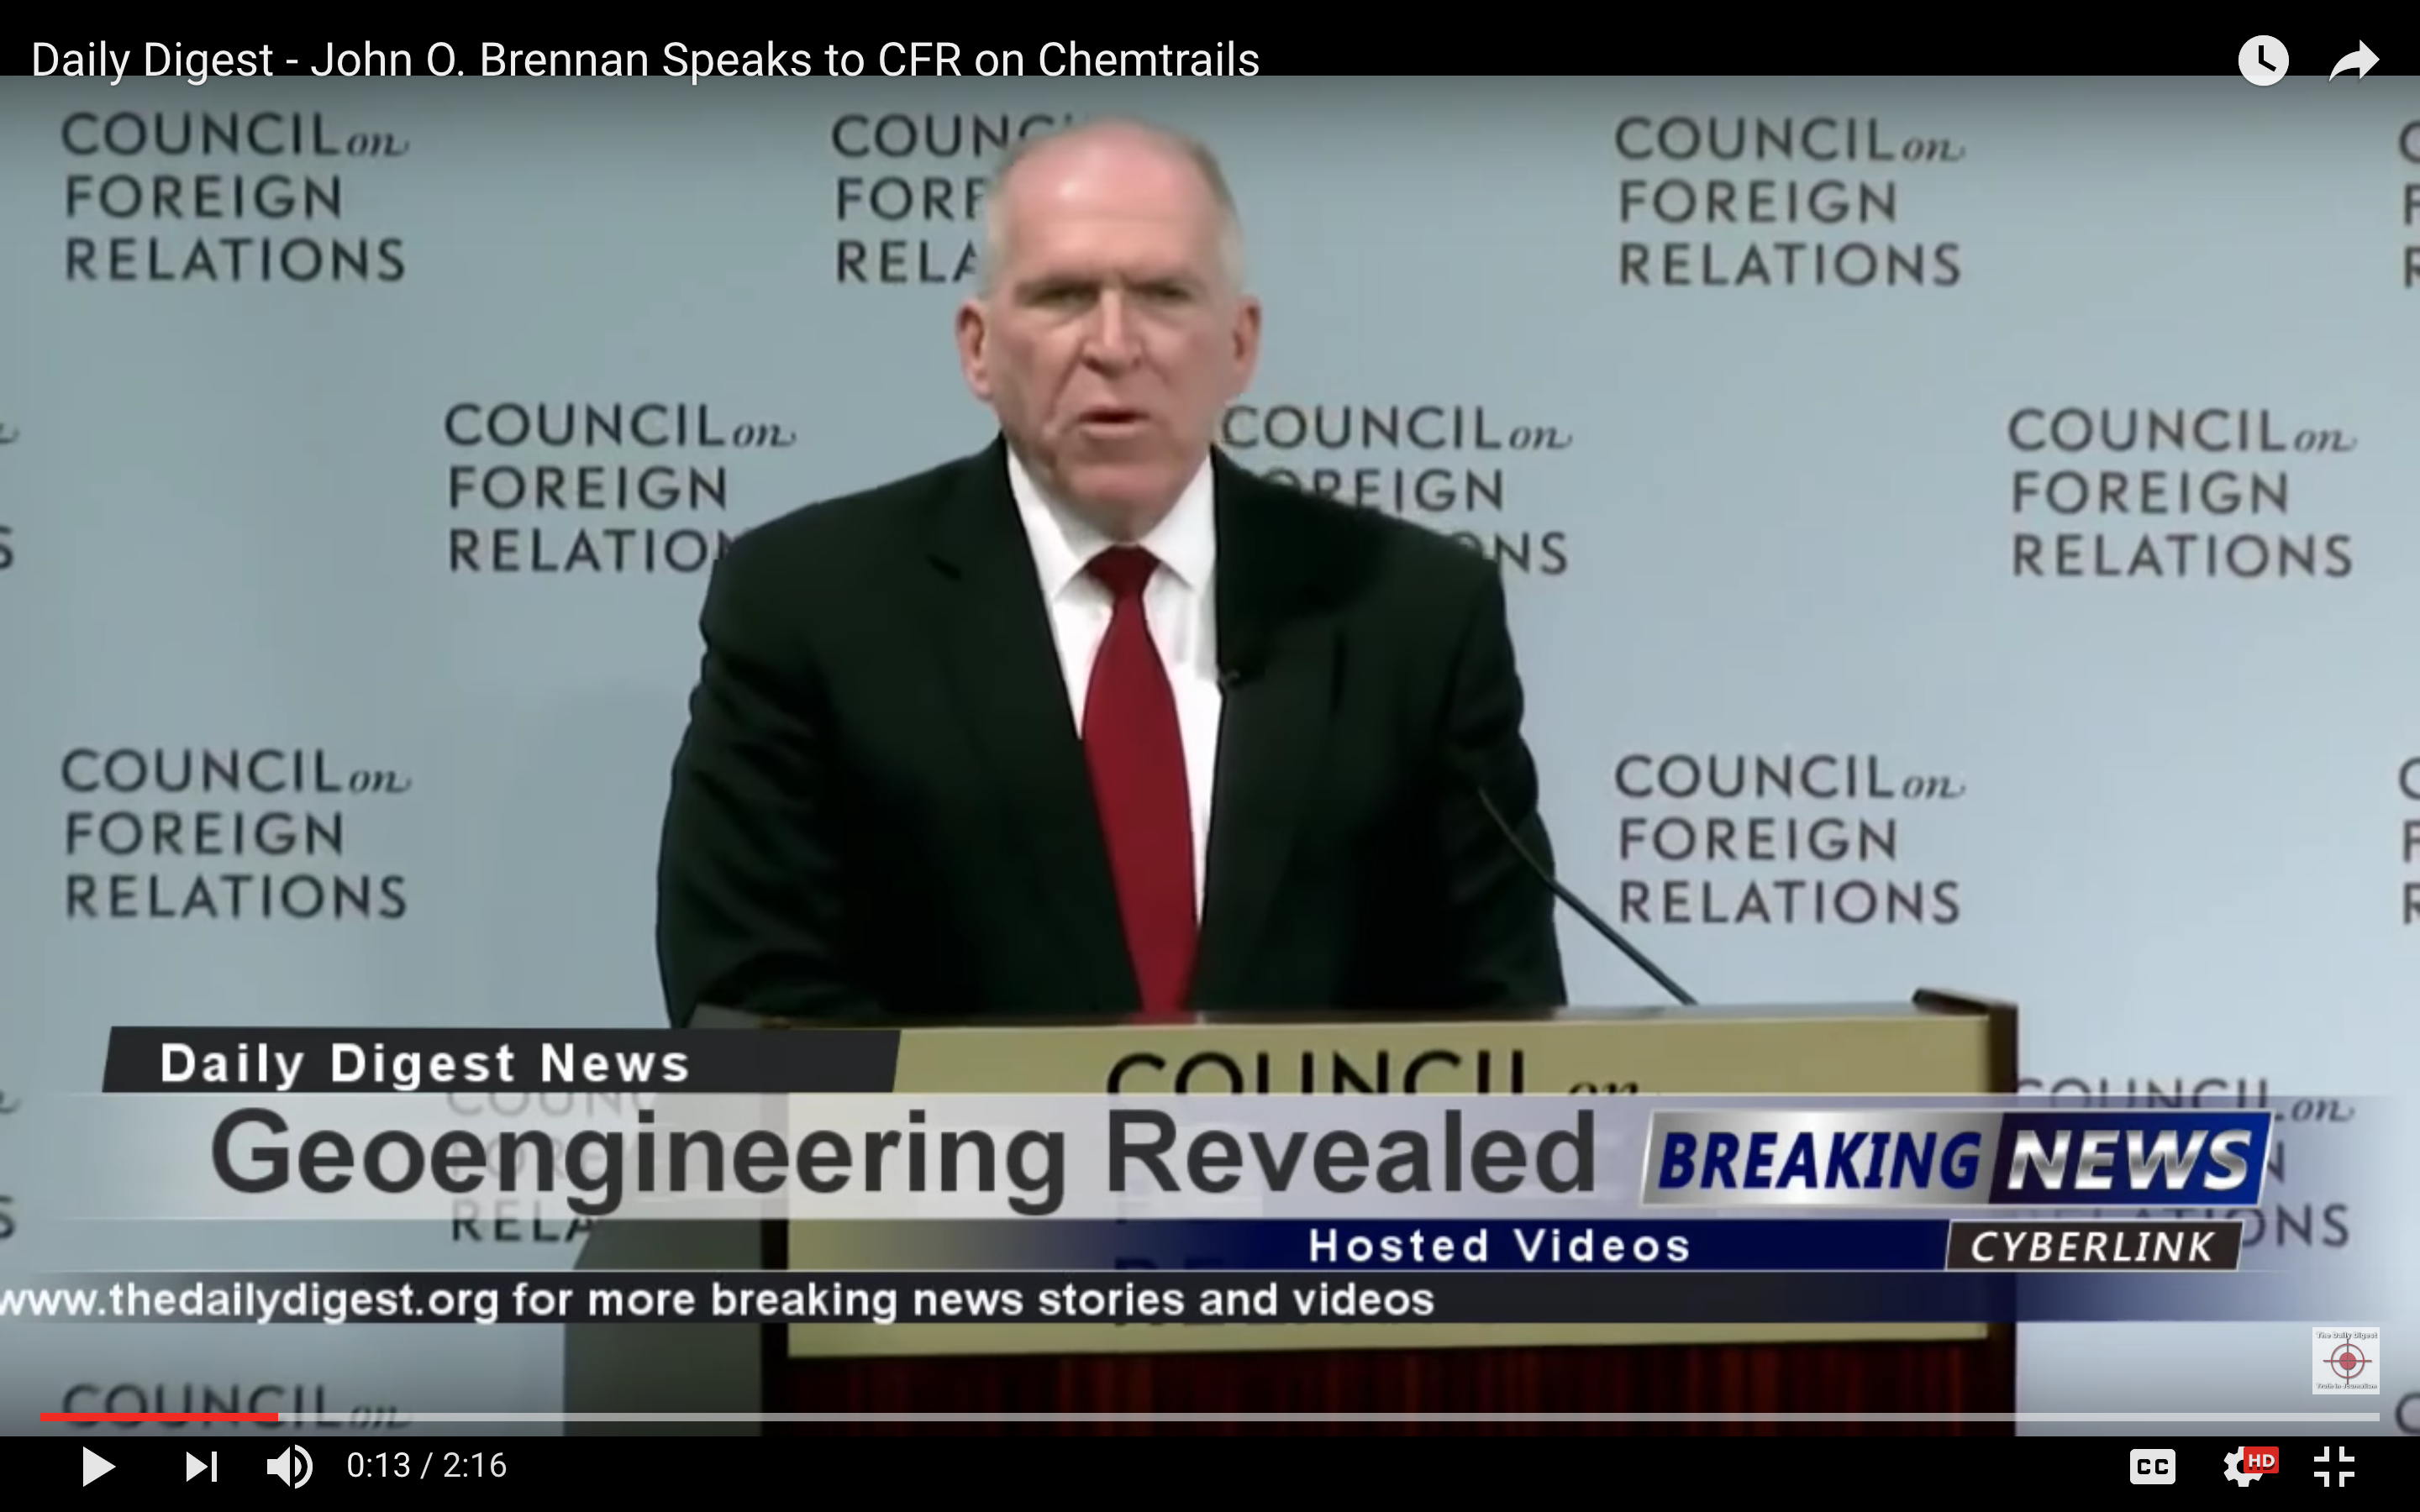 CIA Director (UNTIL JUST DAYS AGO) States (ON CAMERA) His Support For Geoengineering